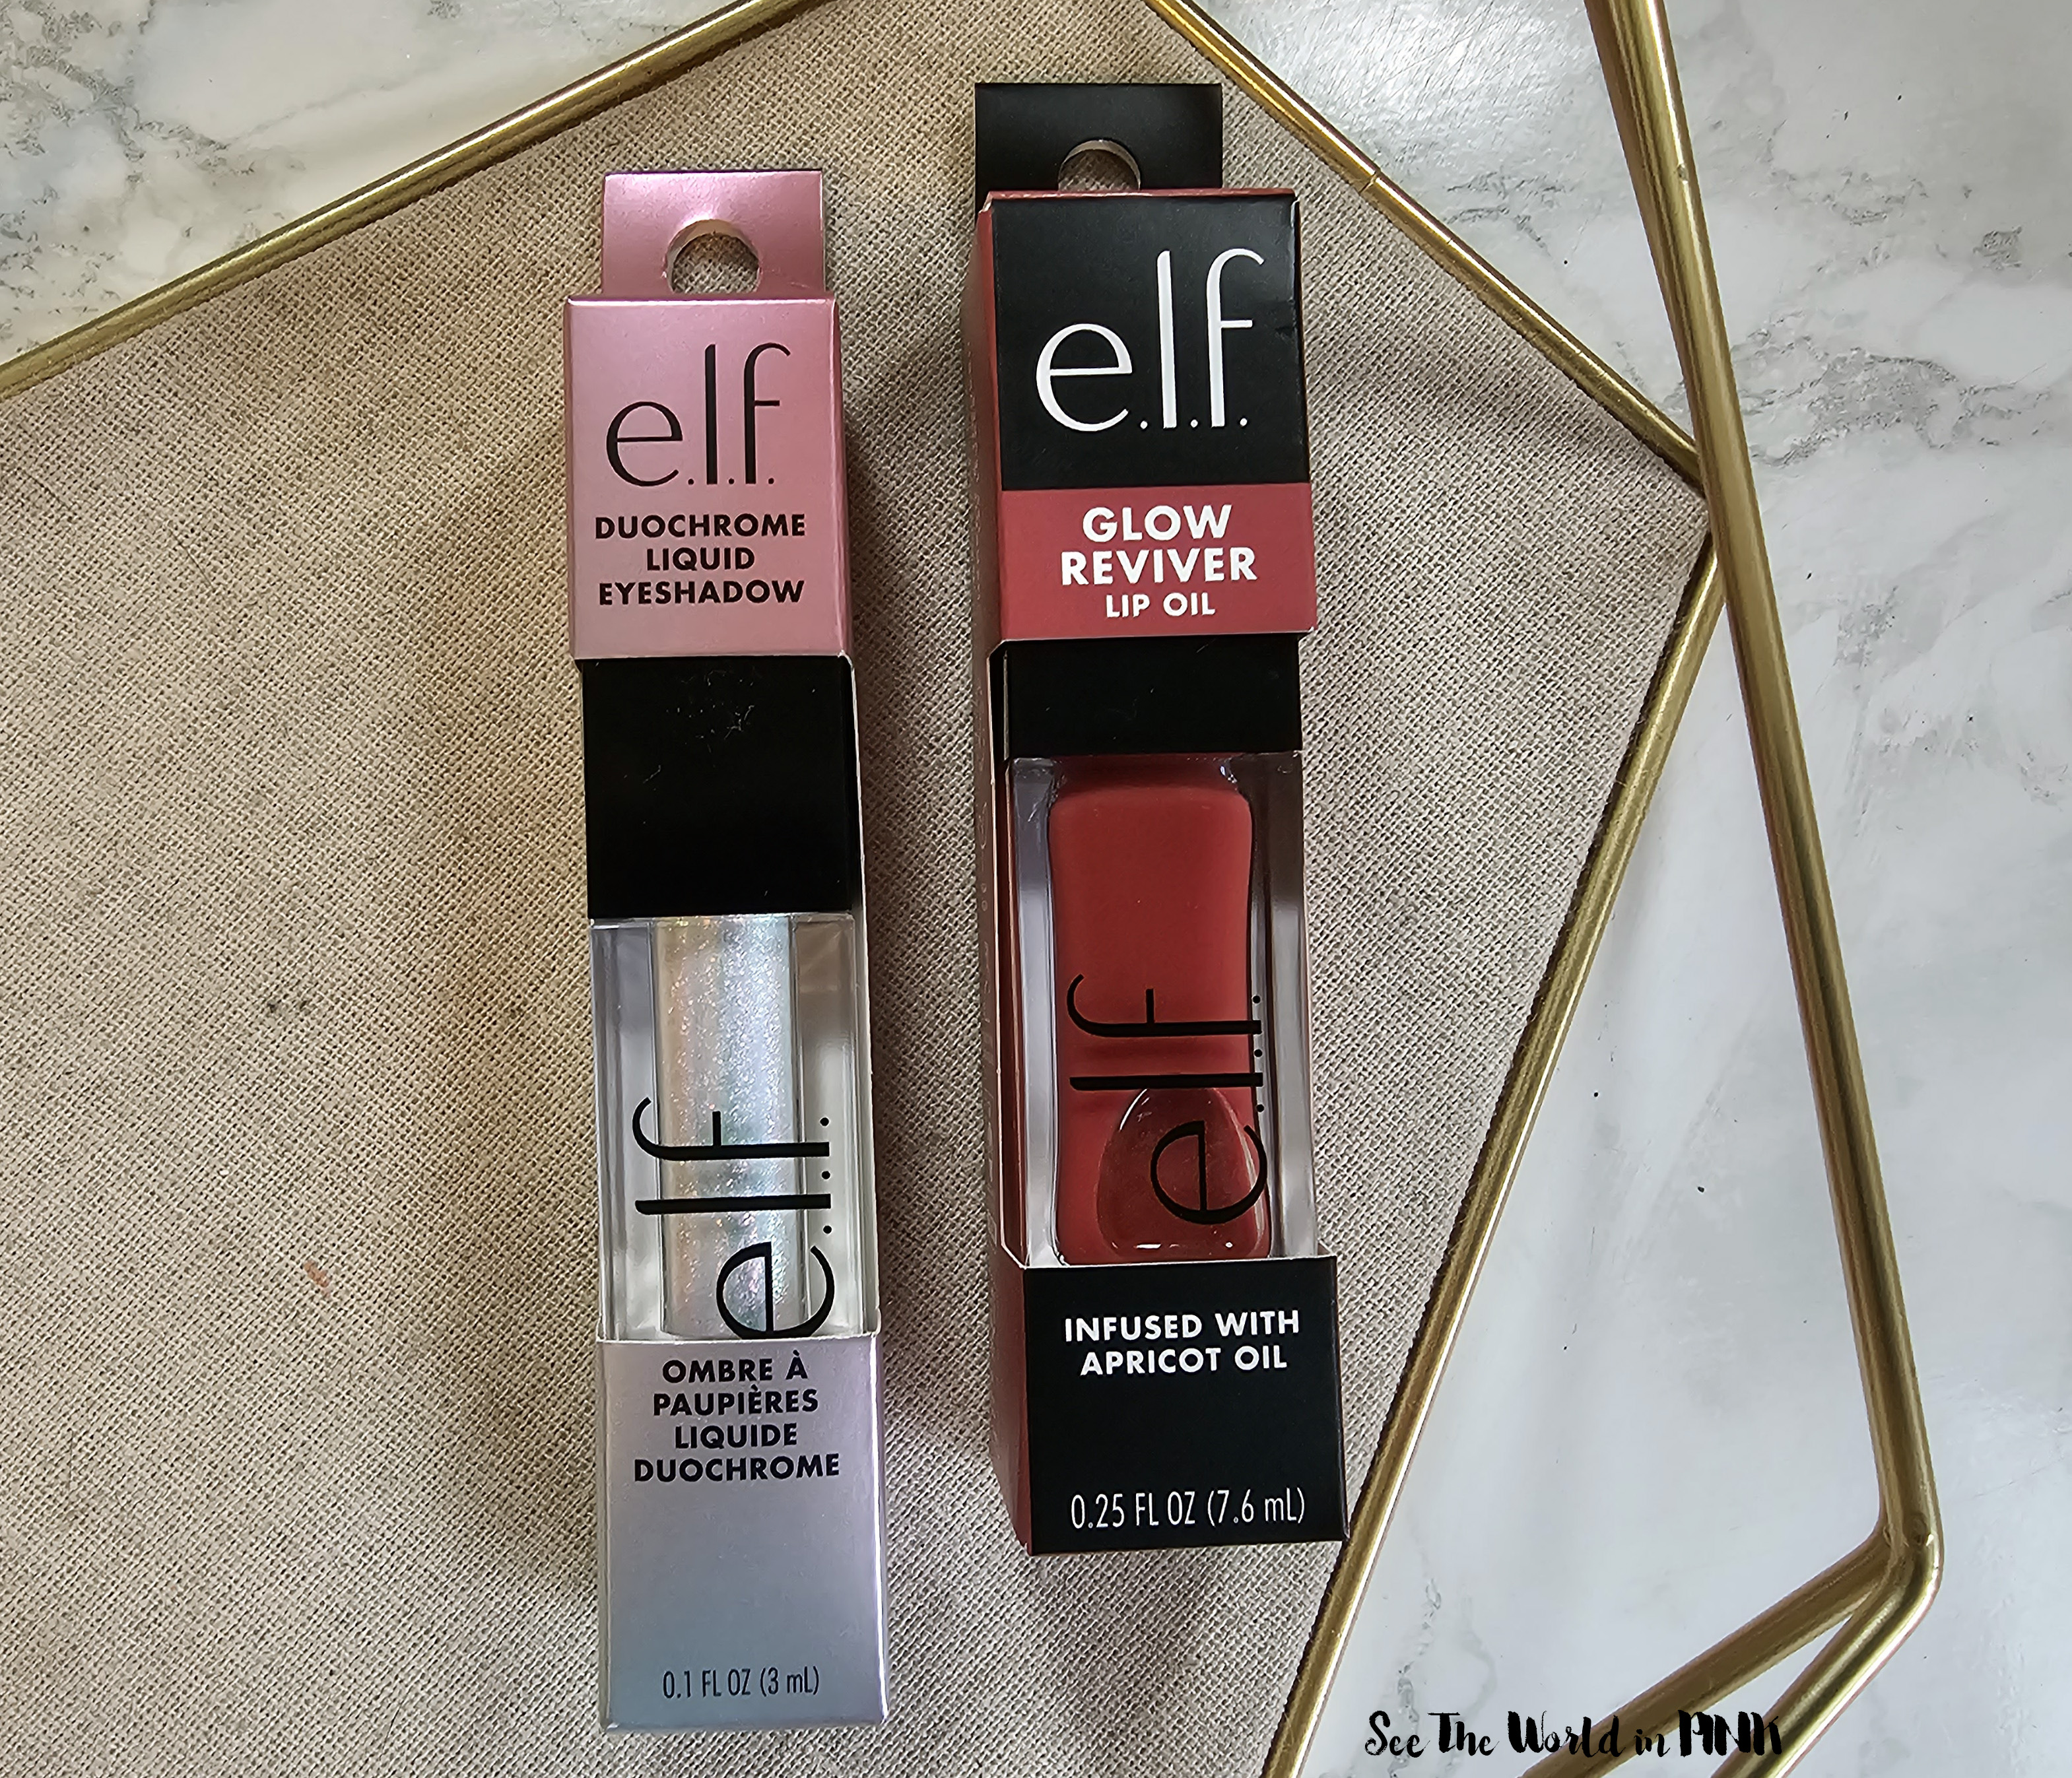 Trying New ELF Products - Glow Reviver Lip Oil and Duochrome Liquid Eyeshadow